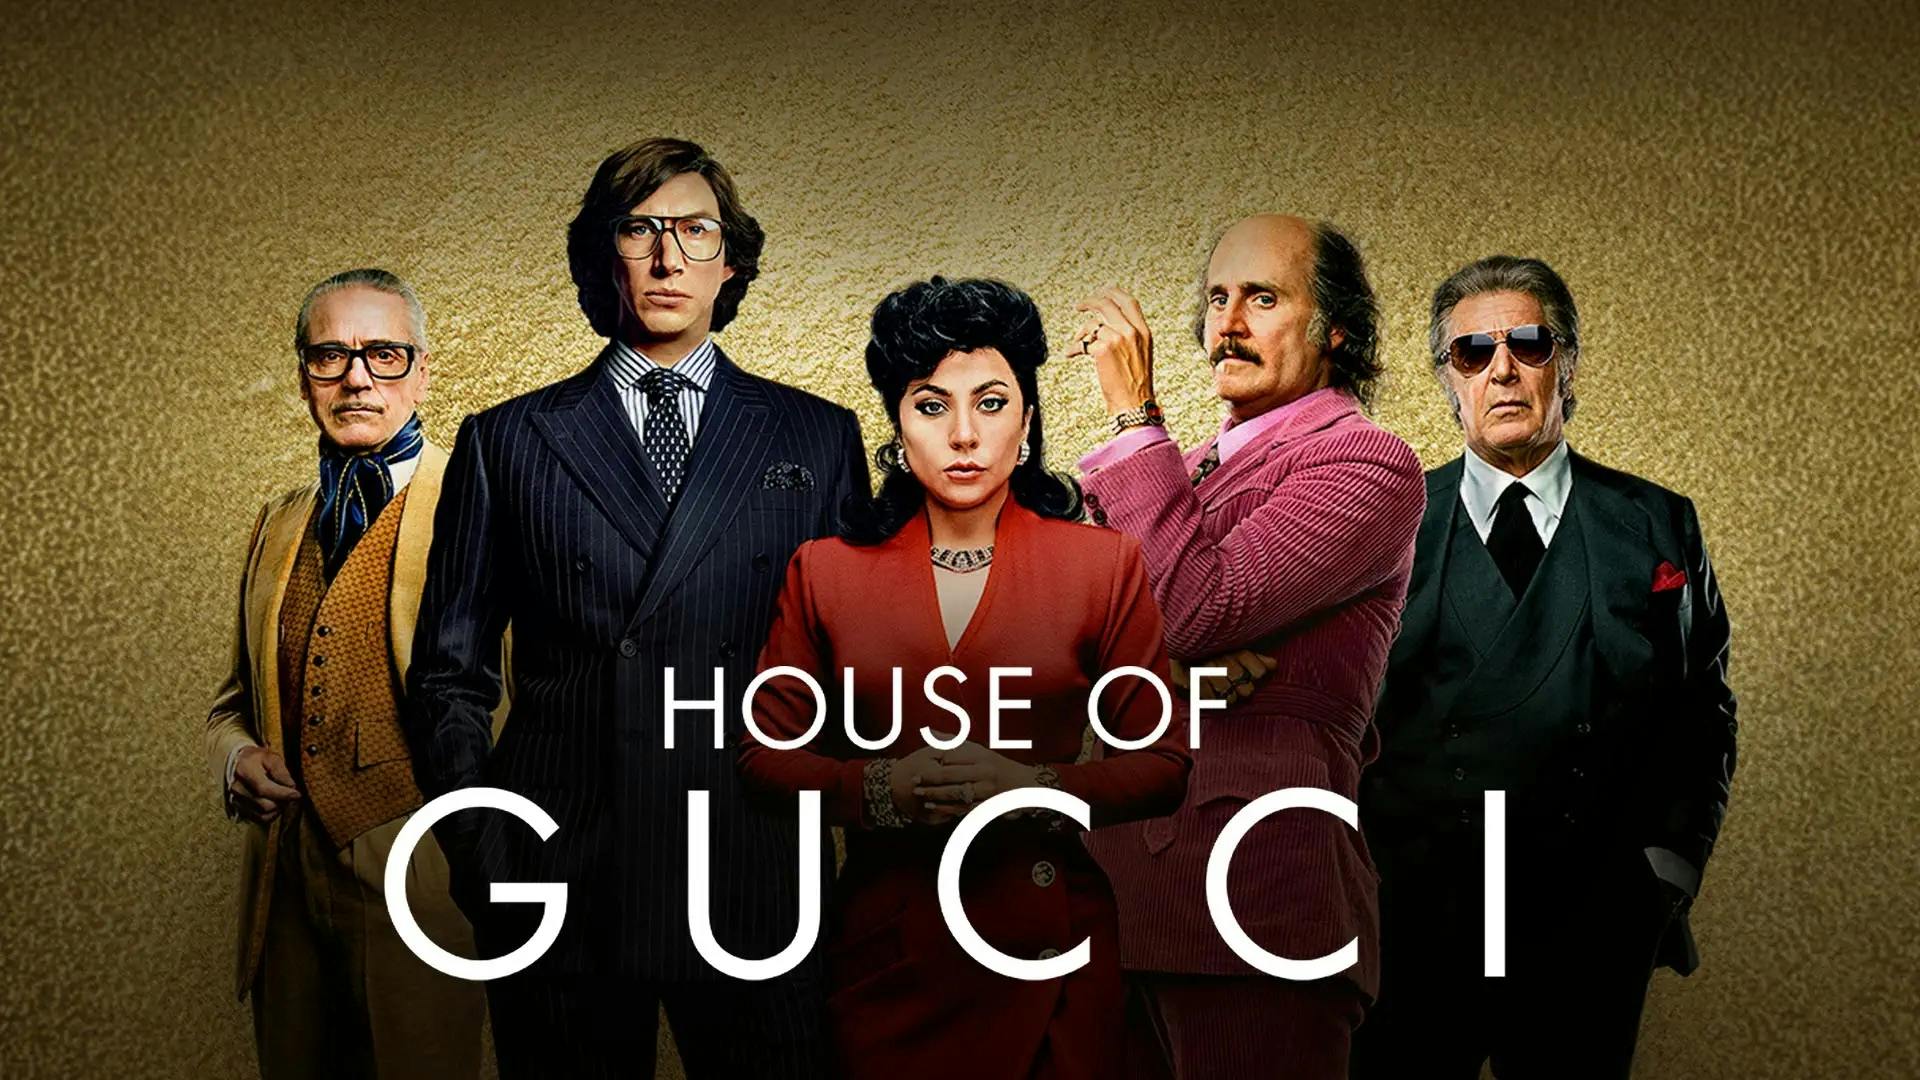 The thumbnail cover for the movie House of Gucci